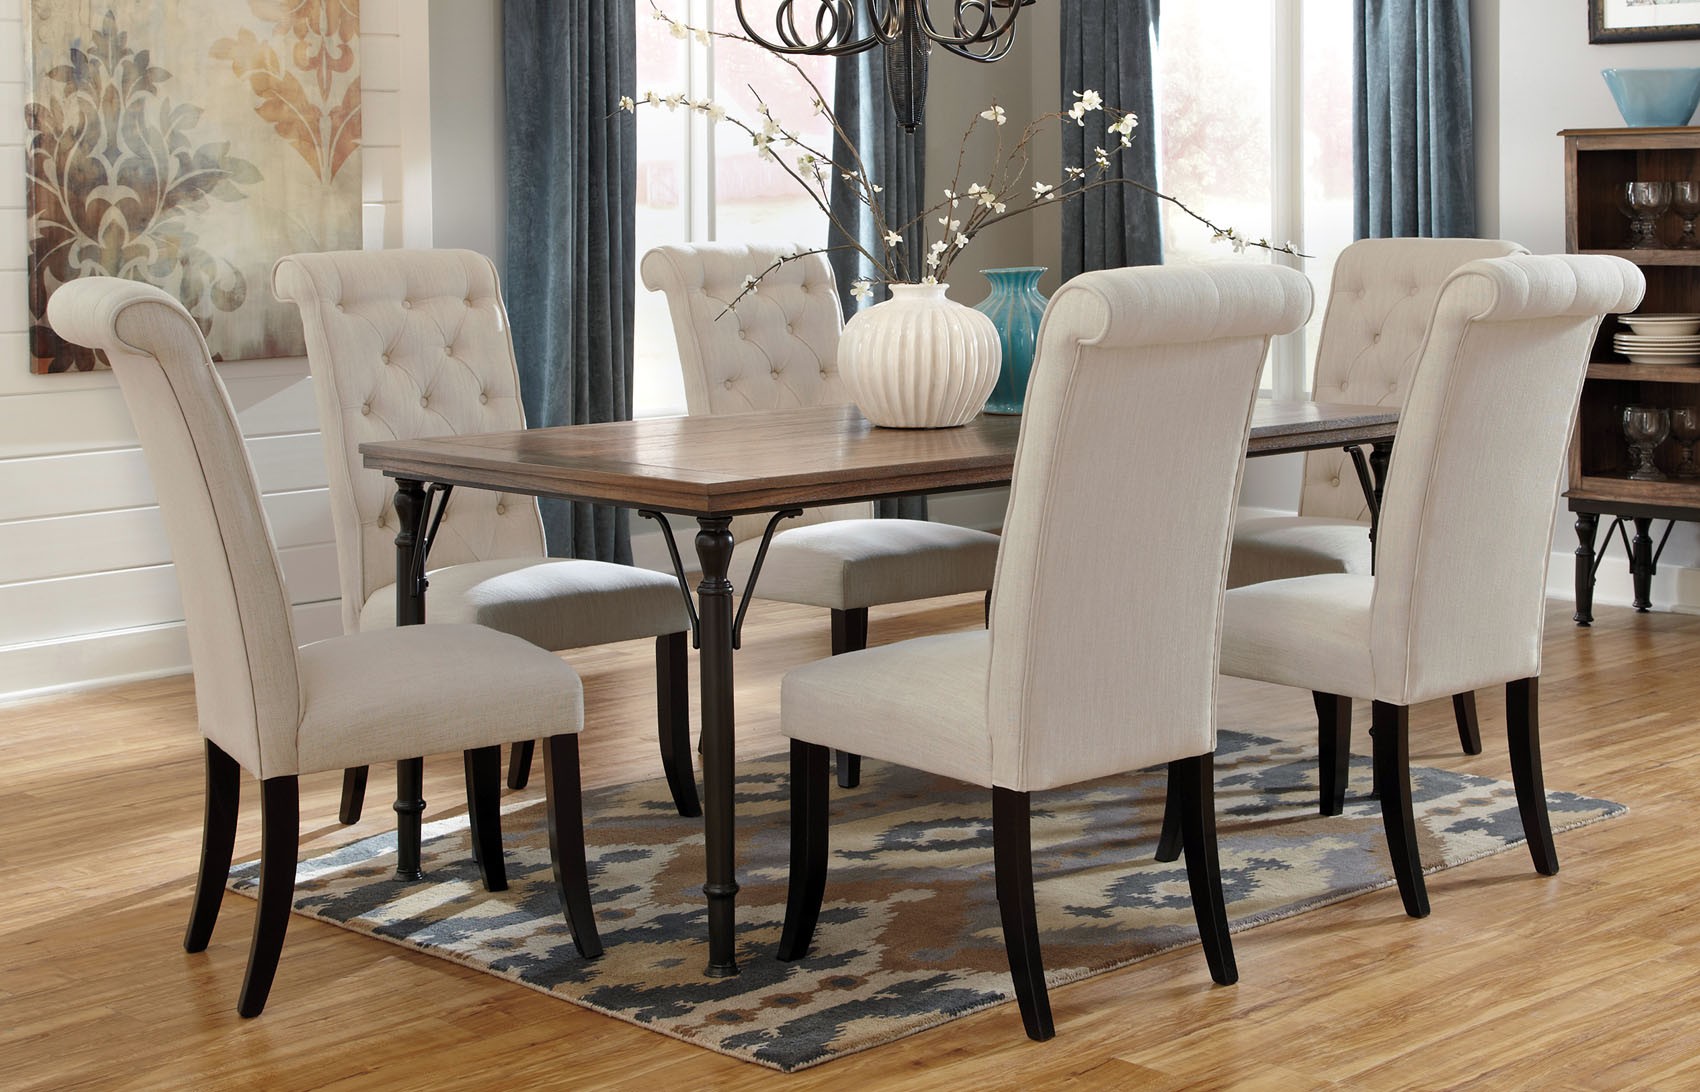 tufted dining room chairs overstock